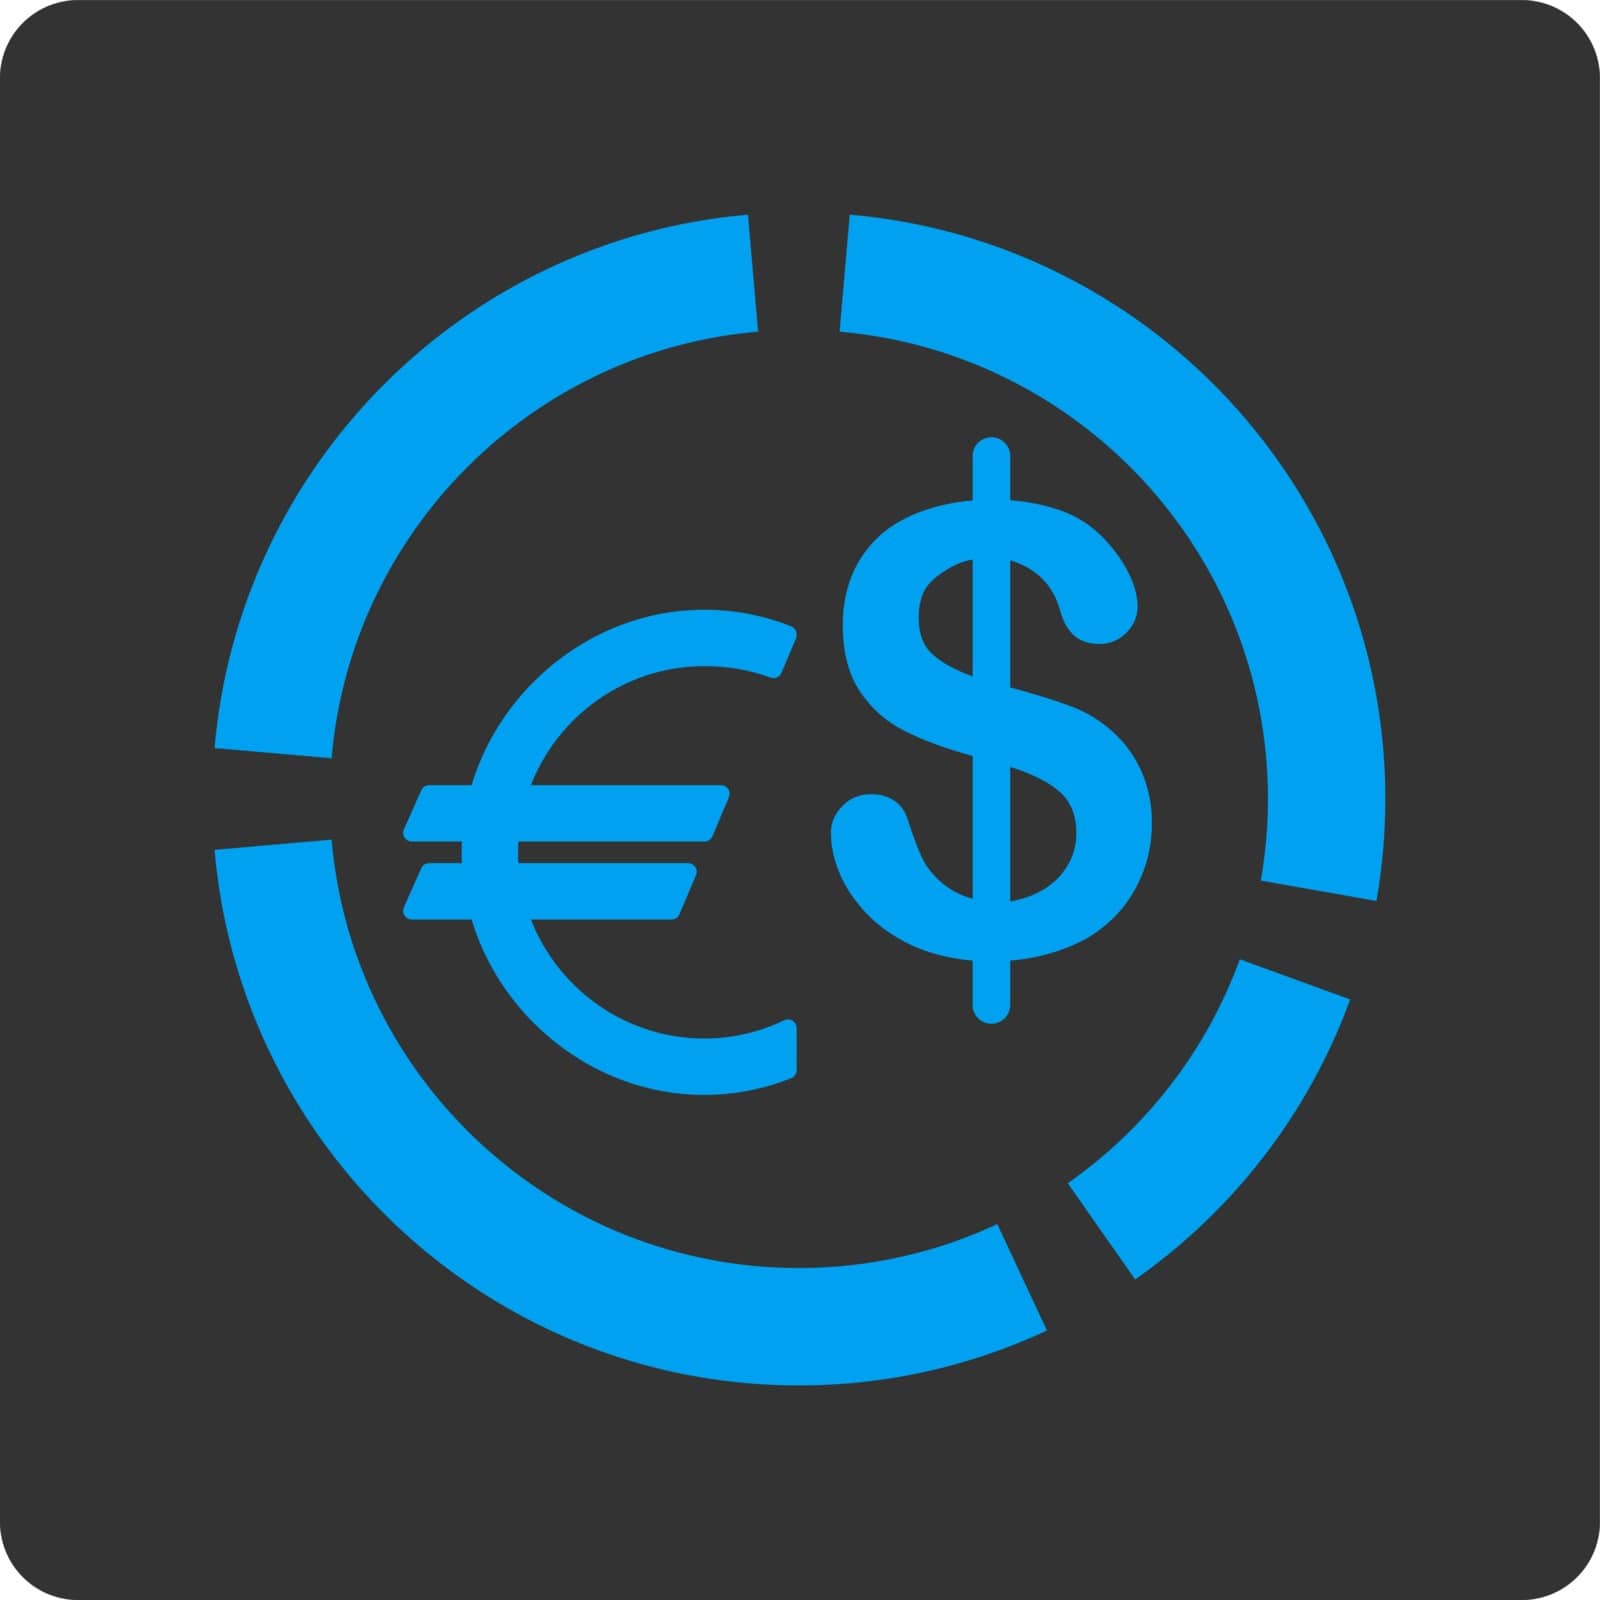 Currency Diagram vector icon. This flat rounded square button uses blue and gray colors and isolated on a white background.